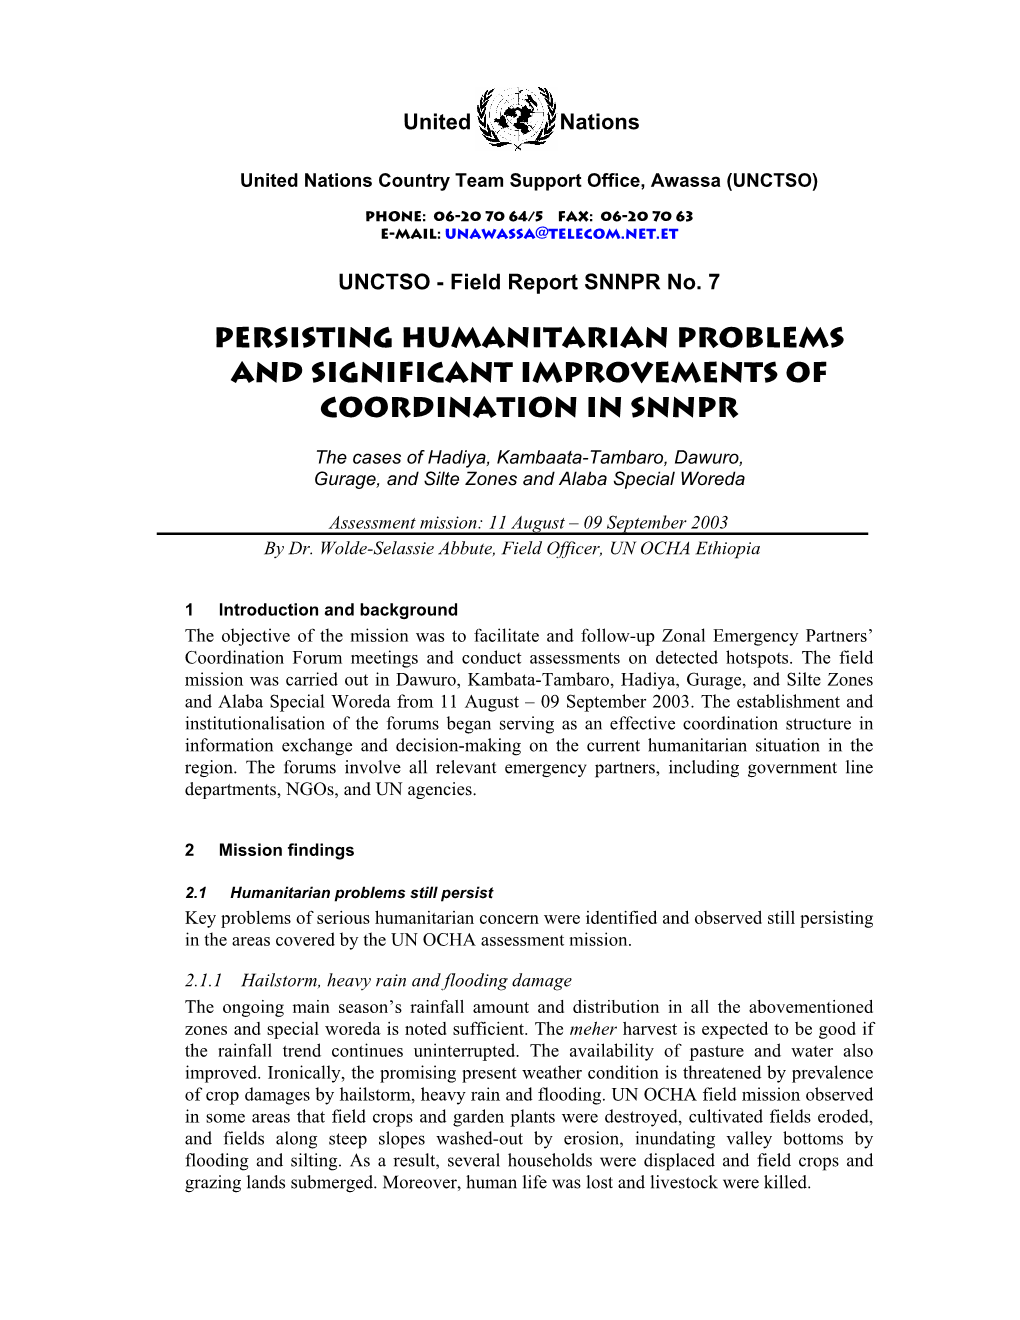 Persisting Humanitarian Problems and Significant Improvements of Coordination in SNNPR